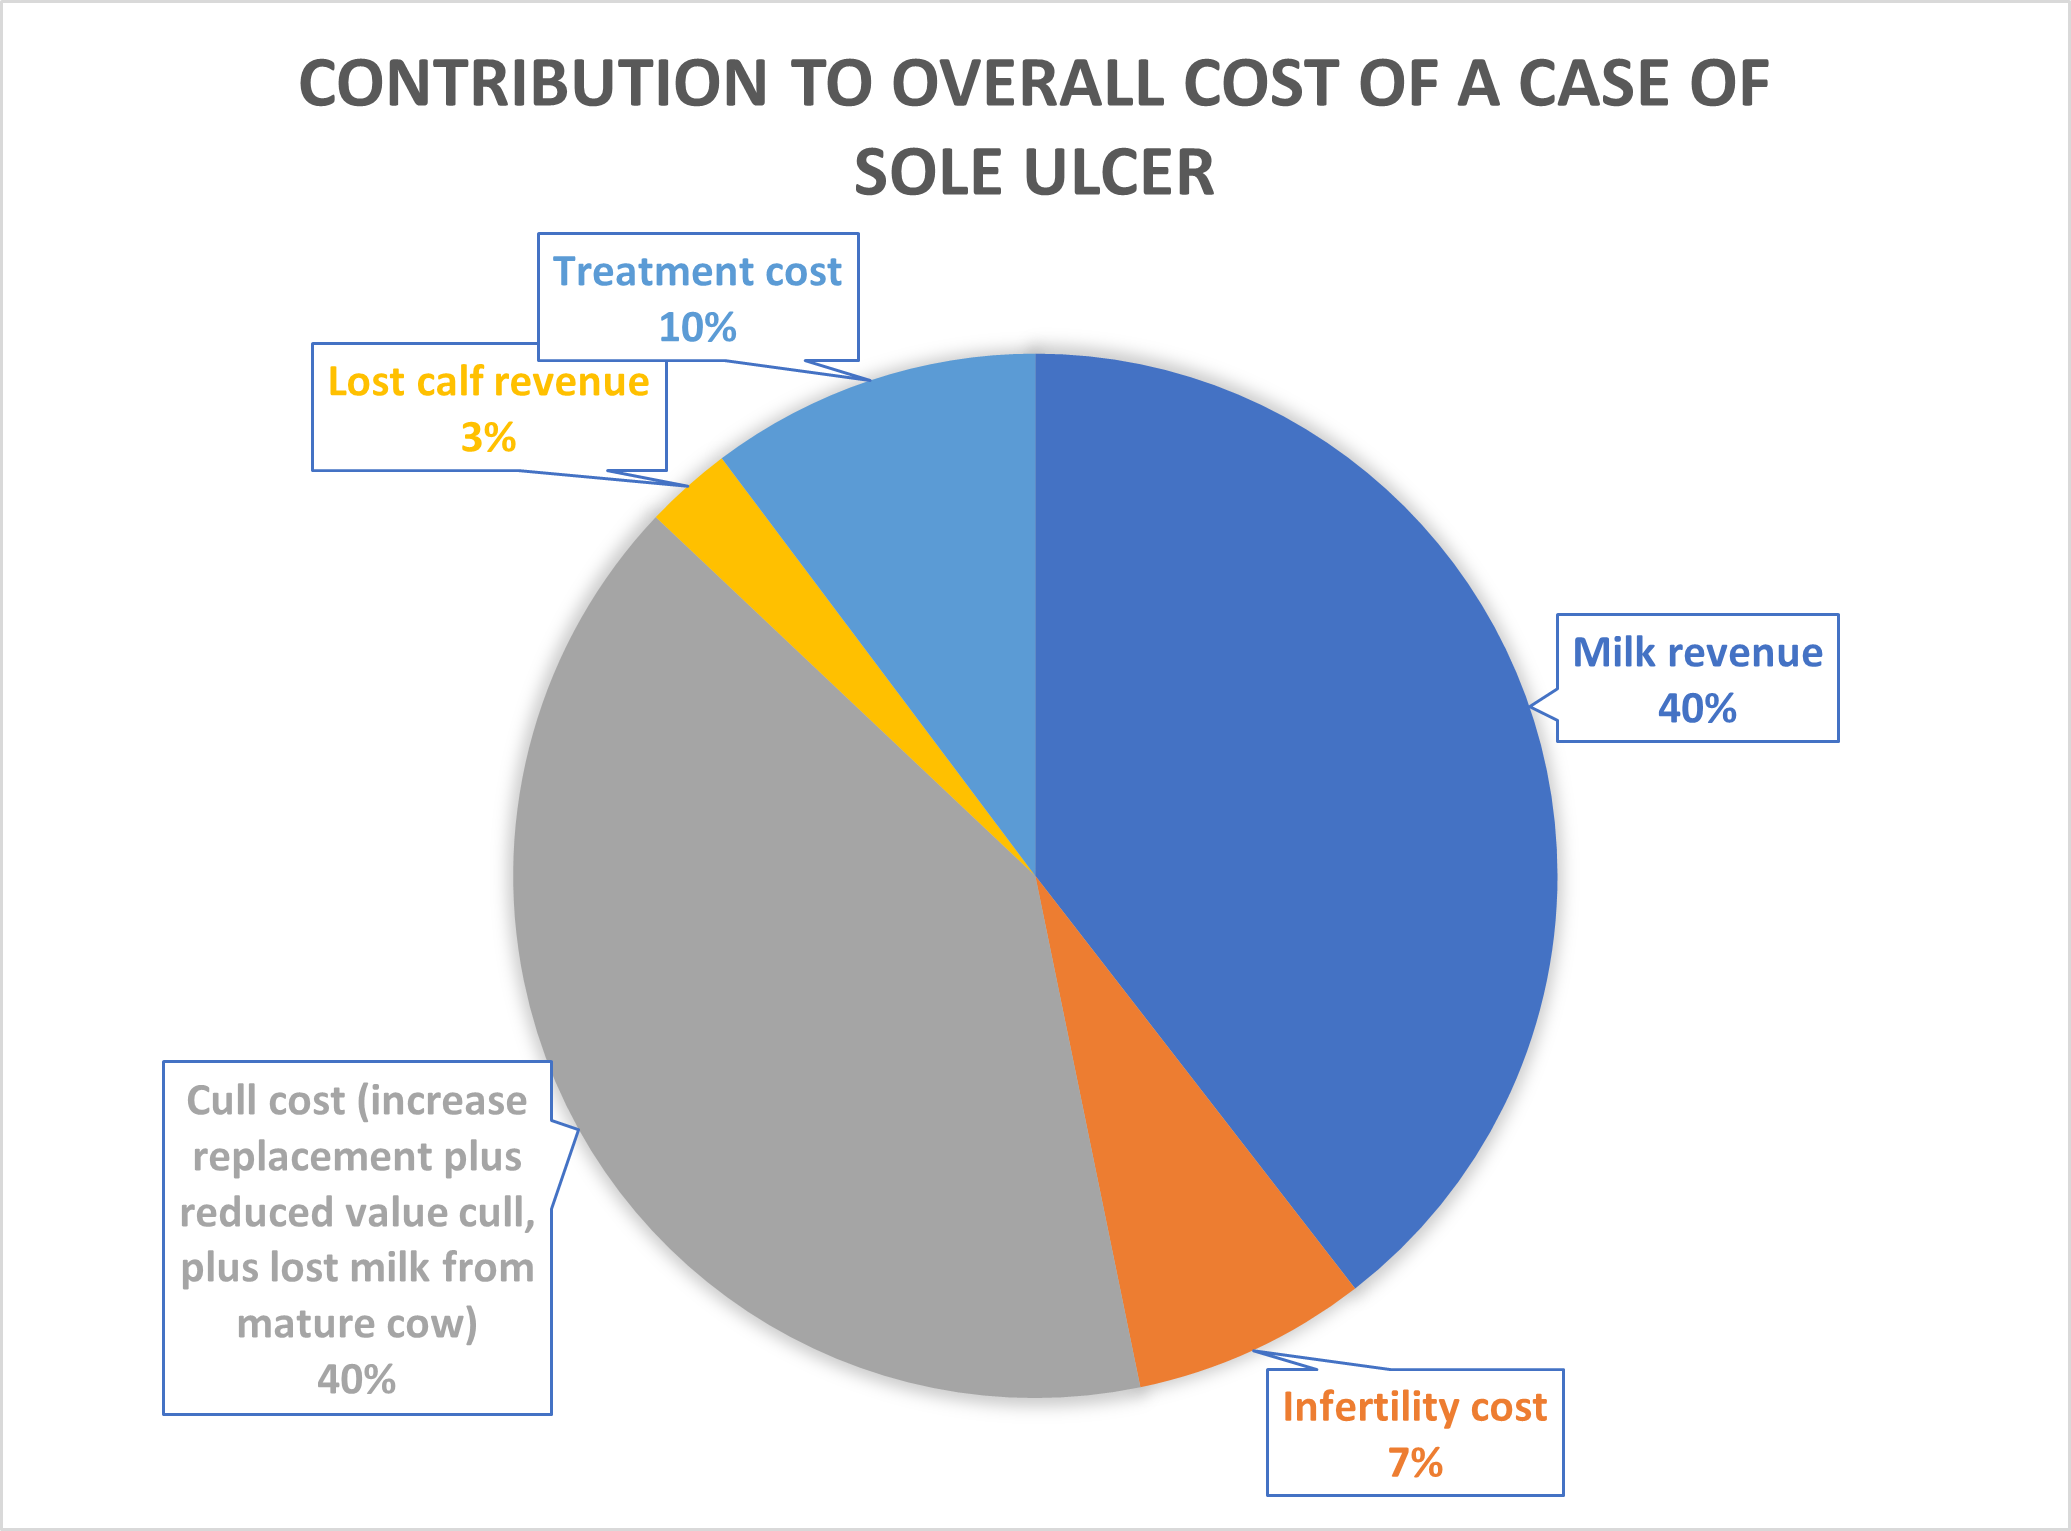 Contribution to costs of a sole ulcer